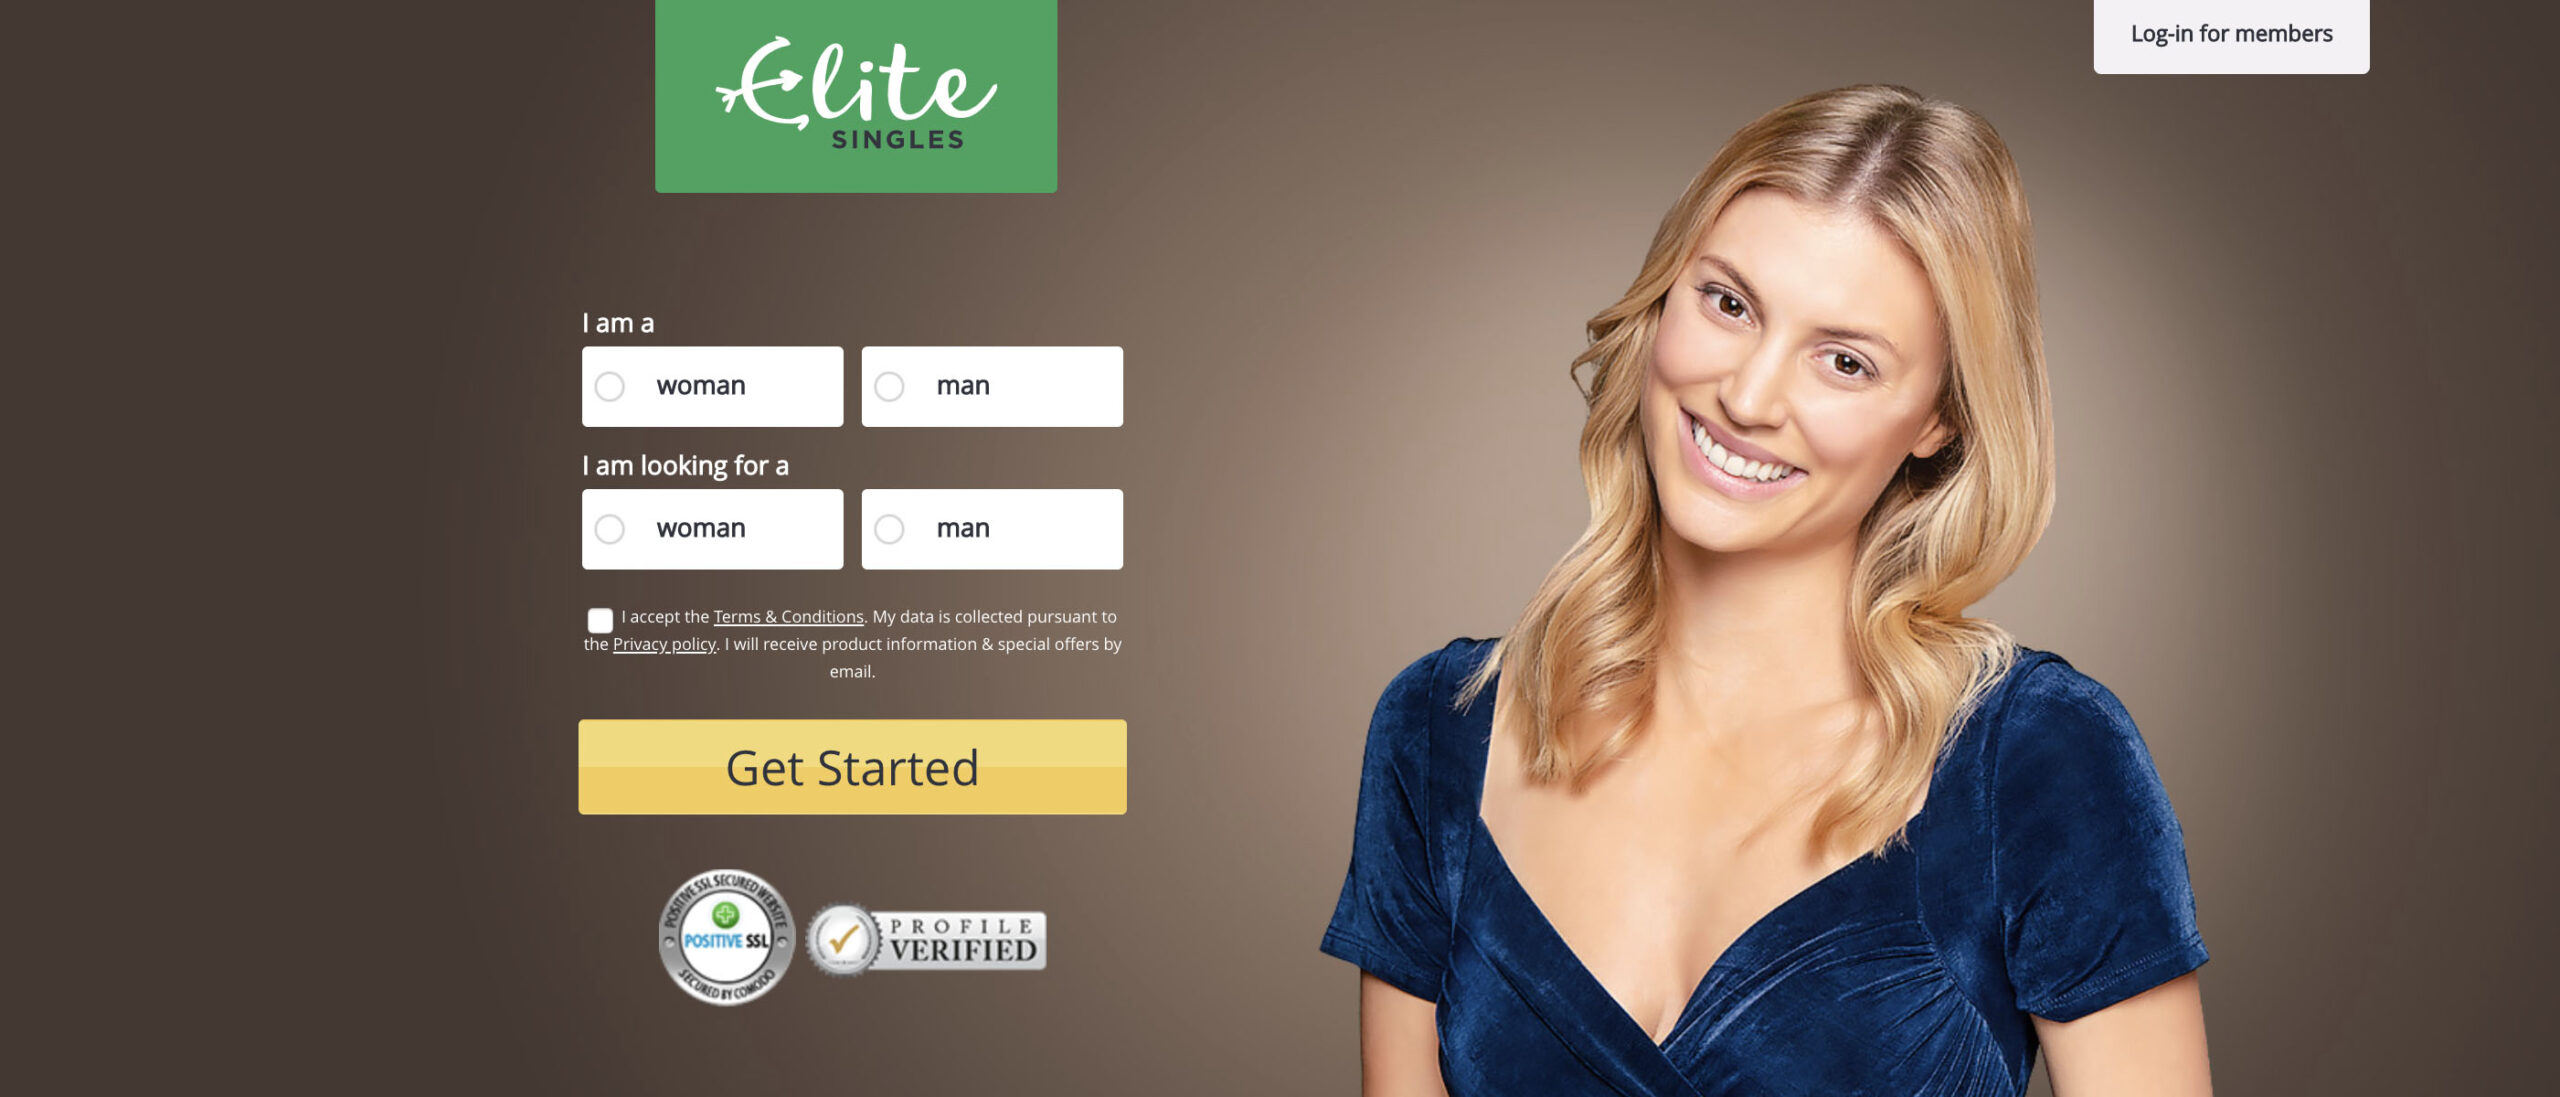 Elite Singles – Best for Educated Professionals